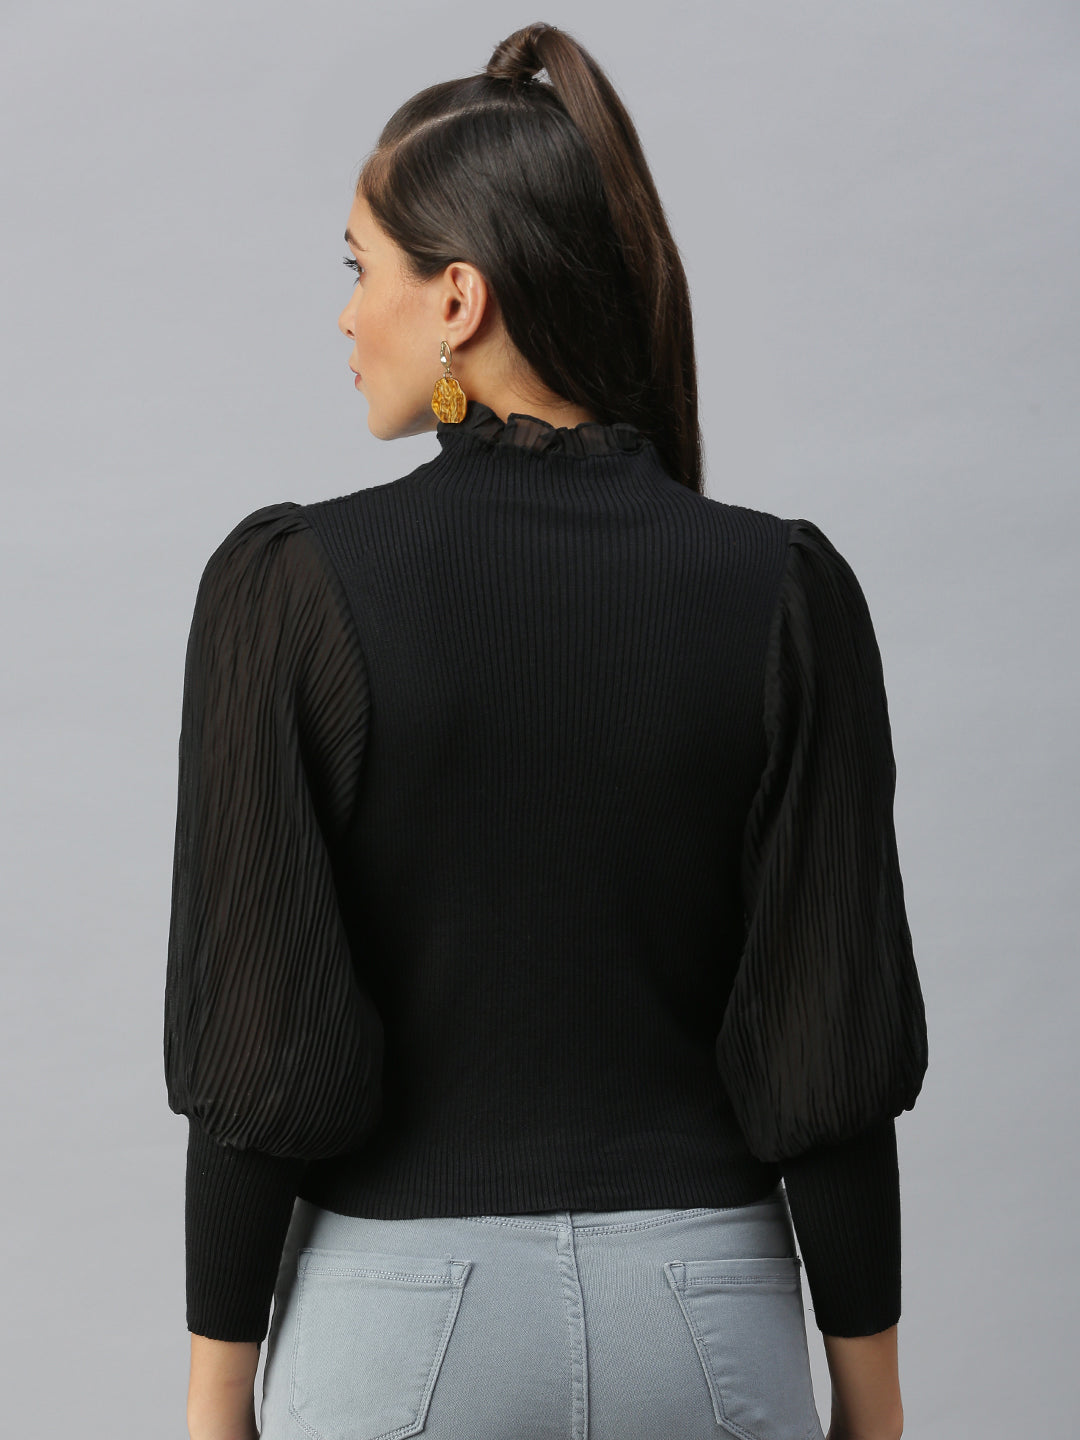 Women High Neck Solid Black Fitted Top